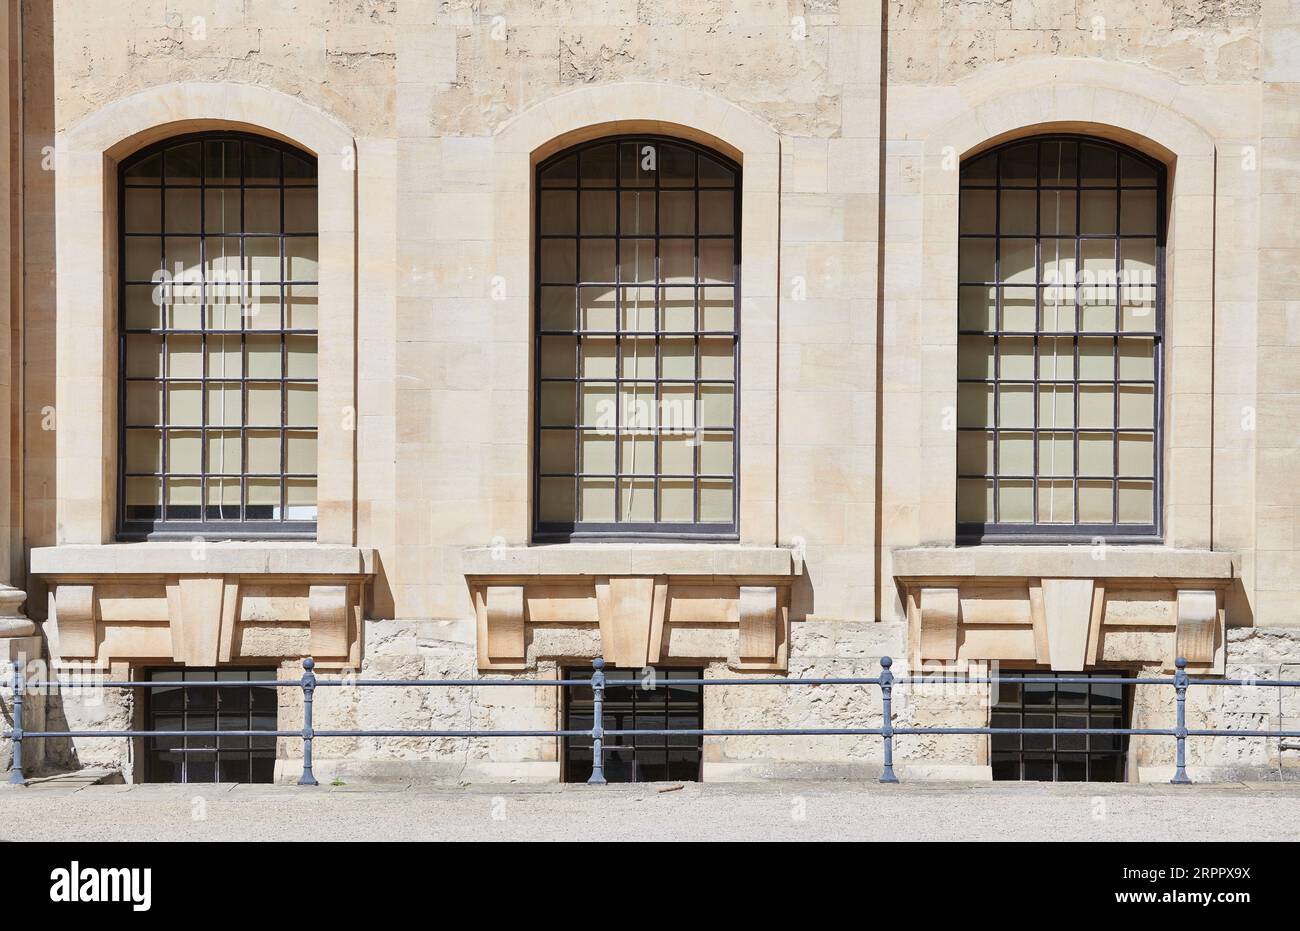 A trio of windows at the Weston Library, Bodleian Library, University of Oxford, England. Stock Photo